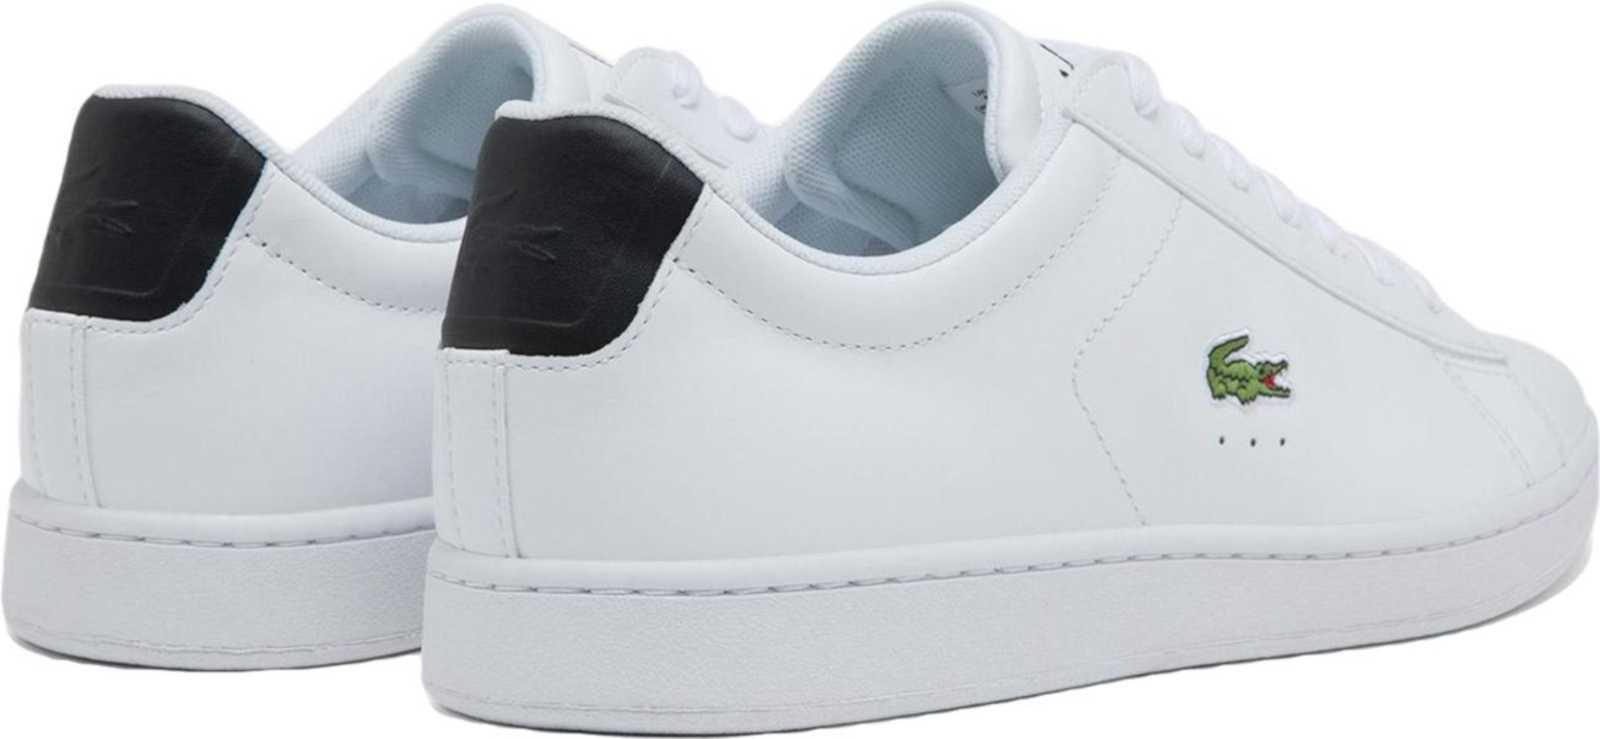 Lacoste Carnaby Evo 0121 2 Sma Leather Trainers in White for Men - Lyst